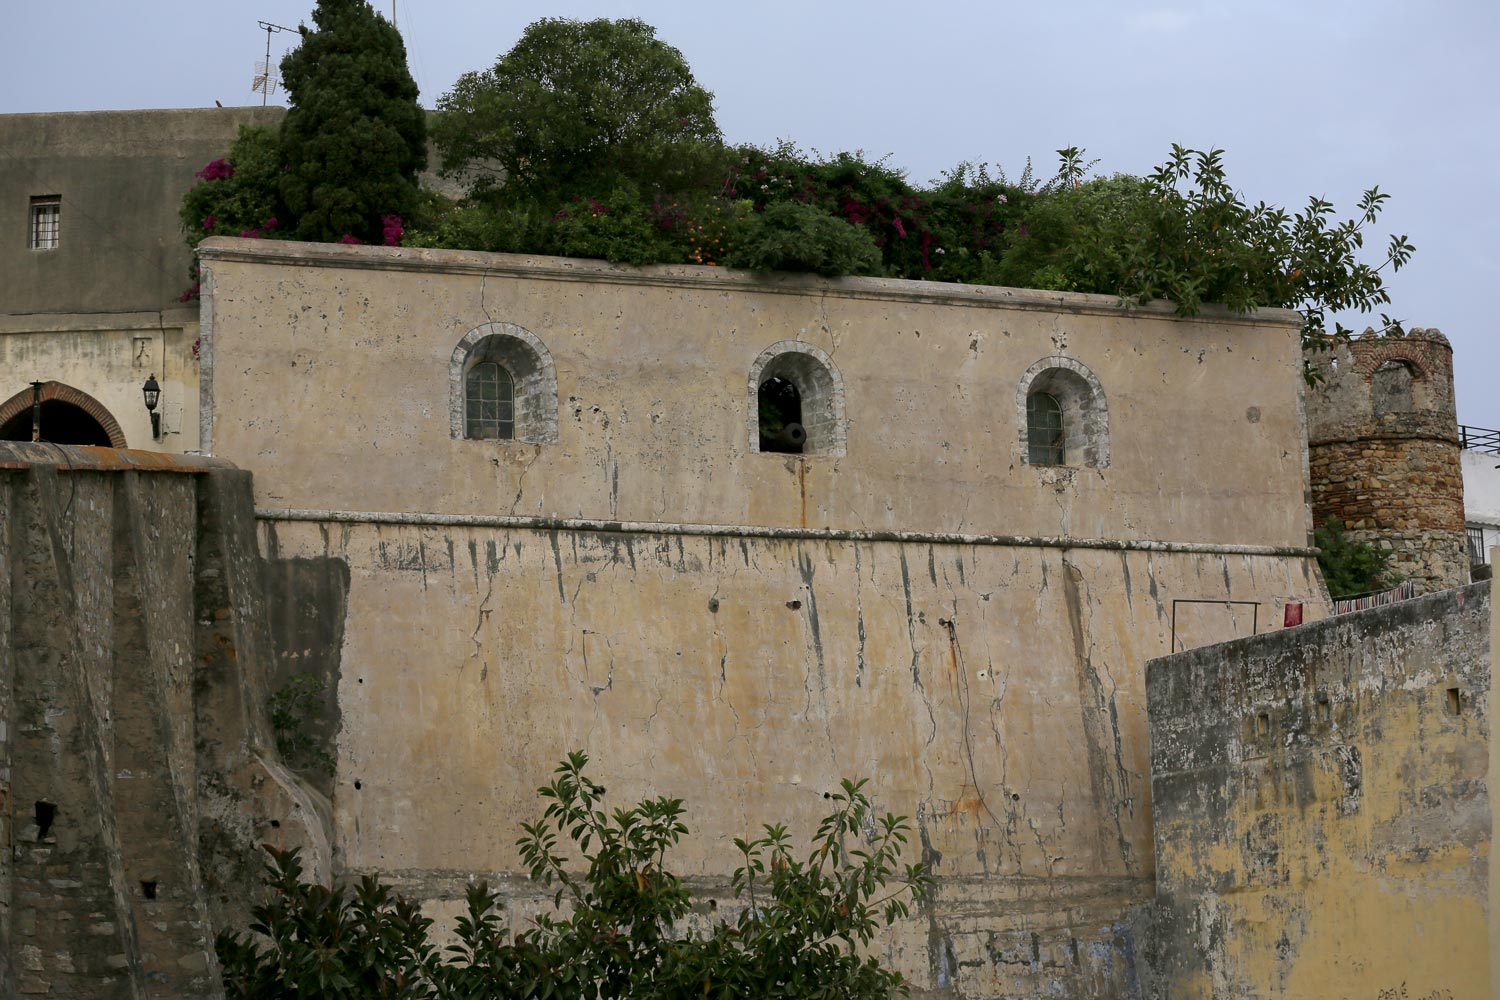 View of the faade with canon portals